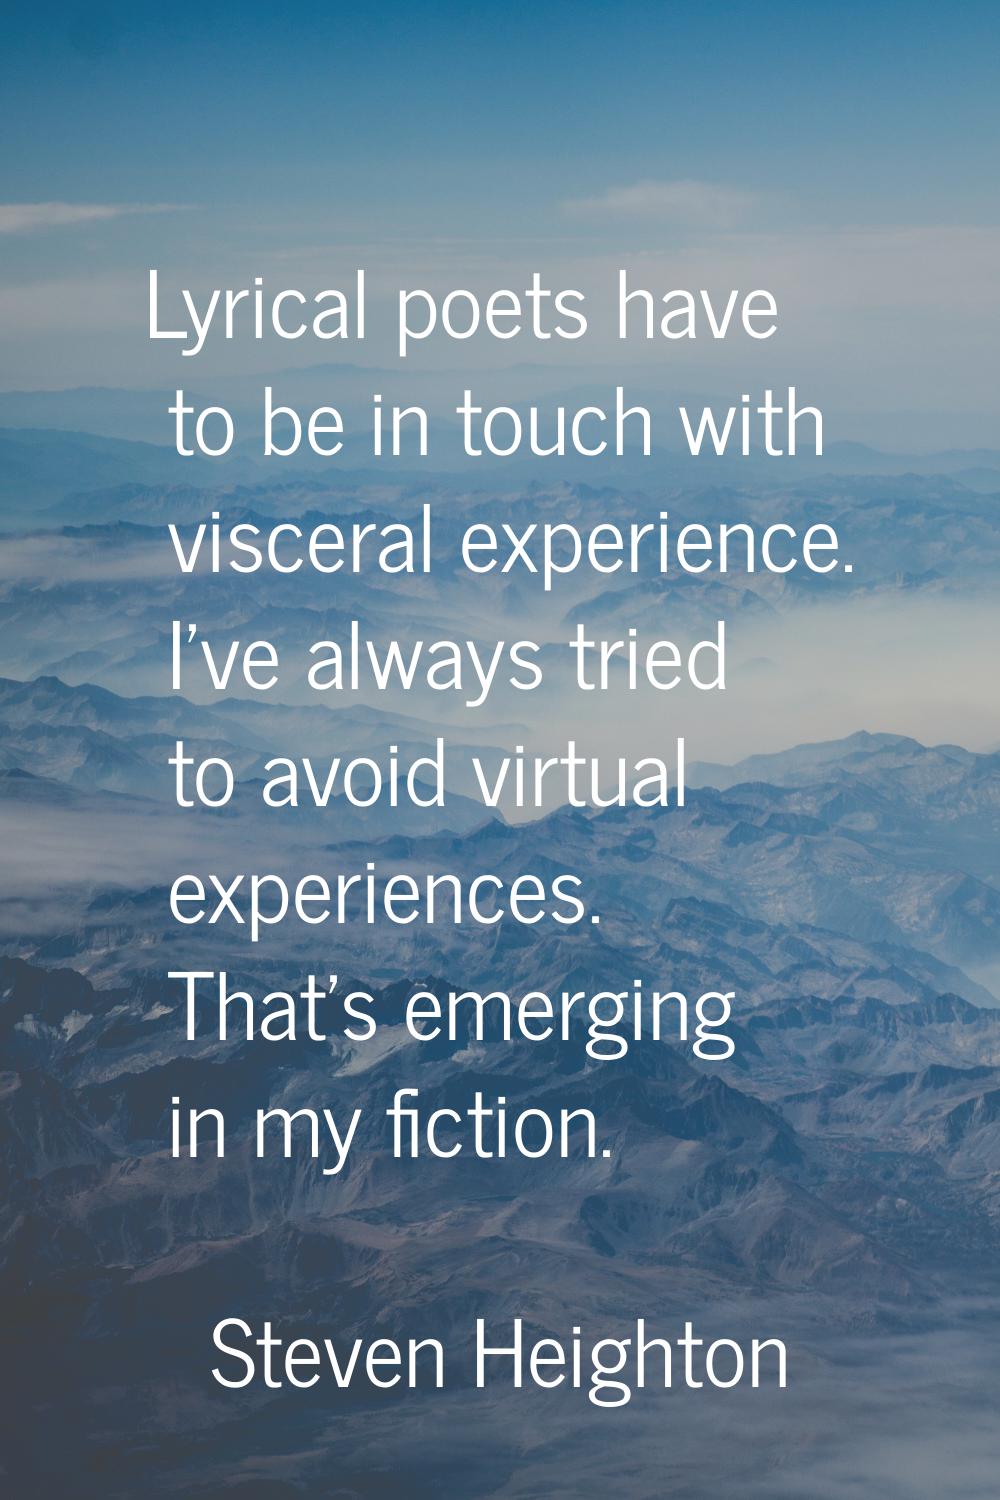 Lyrical poets have to be in touch with visceral experience. I've always tried to avoid virtual expe